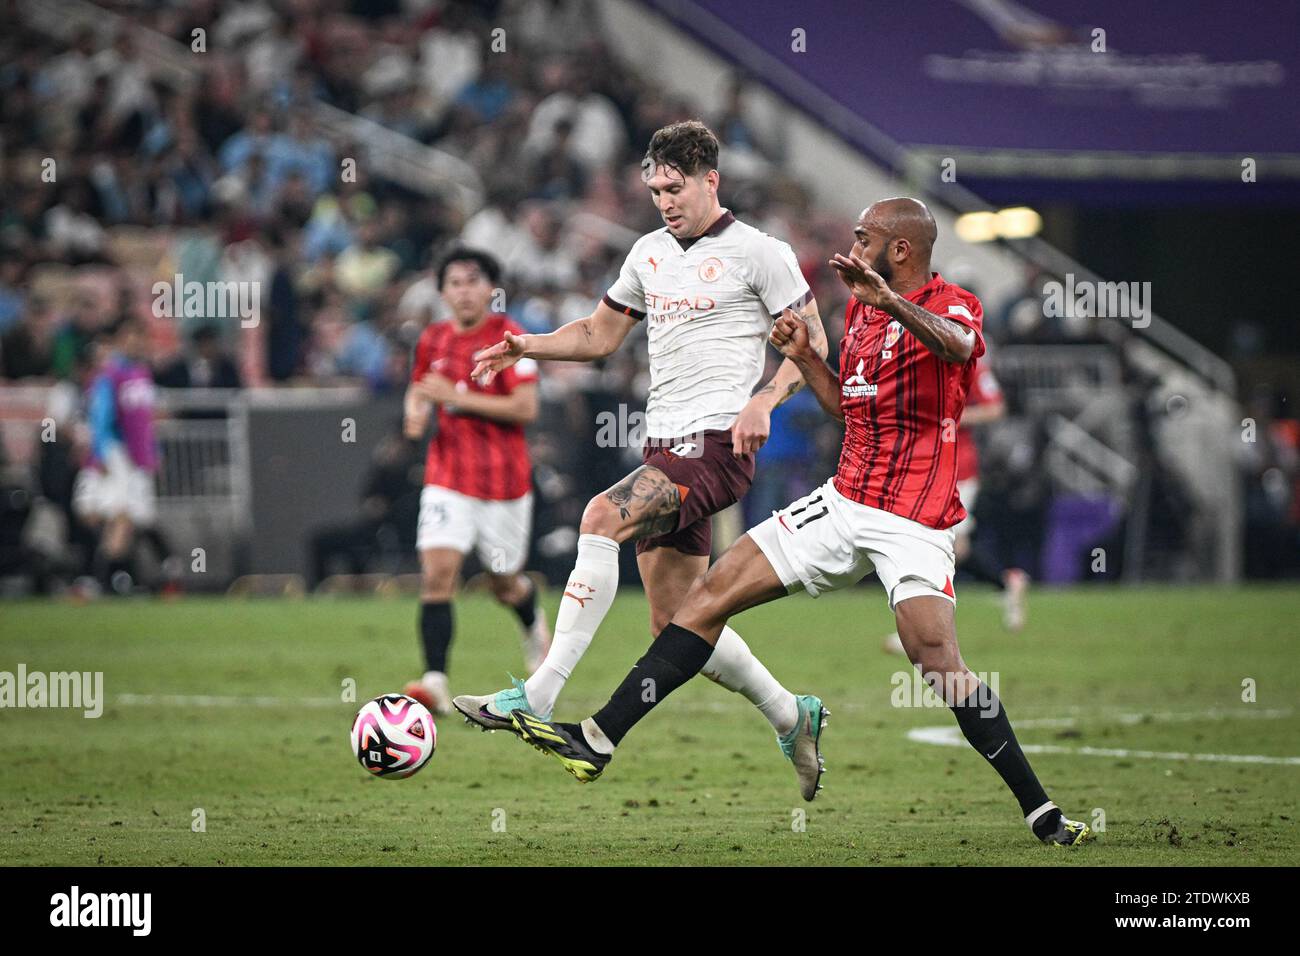 Jeddah, Saudi Arabia. 19th Dec, 2023. King Abdullah Sports City John Stones of Manchester City and Jose Kante of Urawa Reds during the FIFA Club World Cup Semi Final between Urawa Reds of Japan and Manchester City of England at the King Abdullah Sports City Stadium in Jeddah, Saudi Arabia. City won the game 3-0 and will play Fluminense of Brazil in the final on Friday. (Alexandre Neto/SPP) Credit: SPP Sport Press Photo. /Alamy Live News Stock Photo